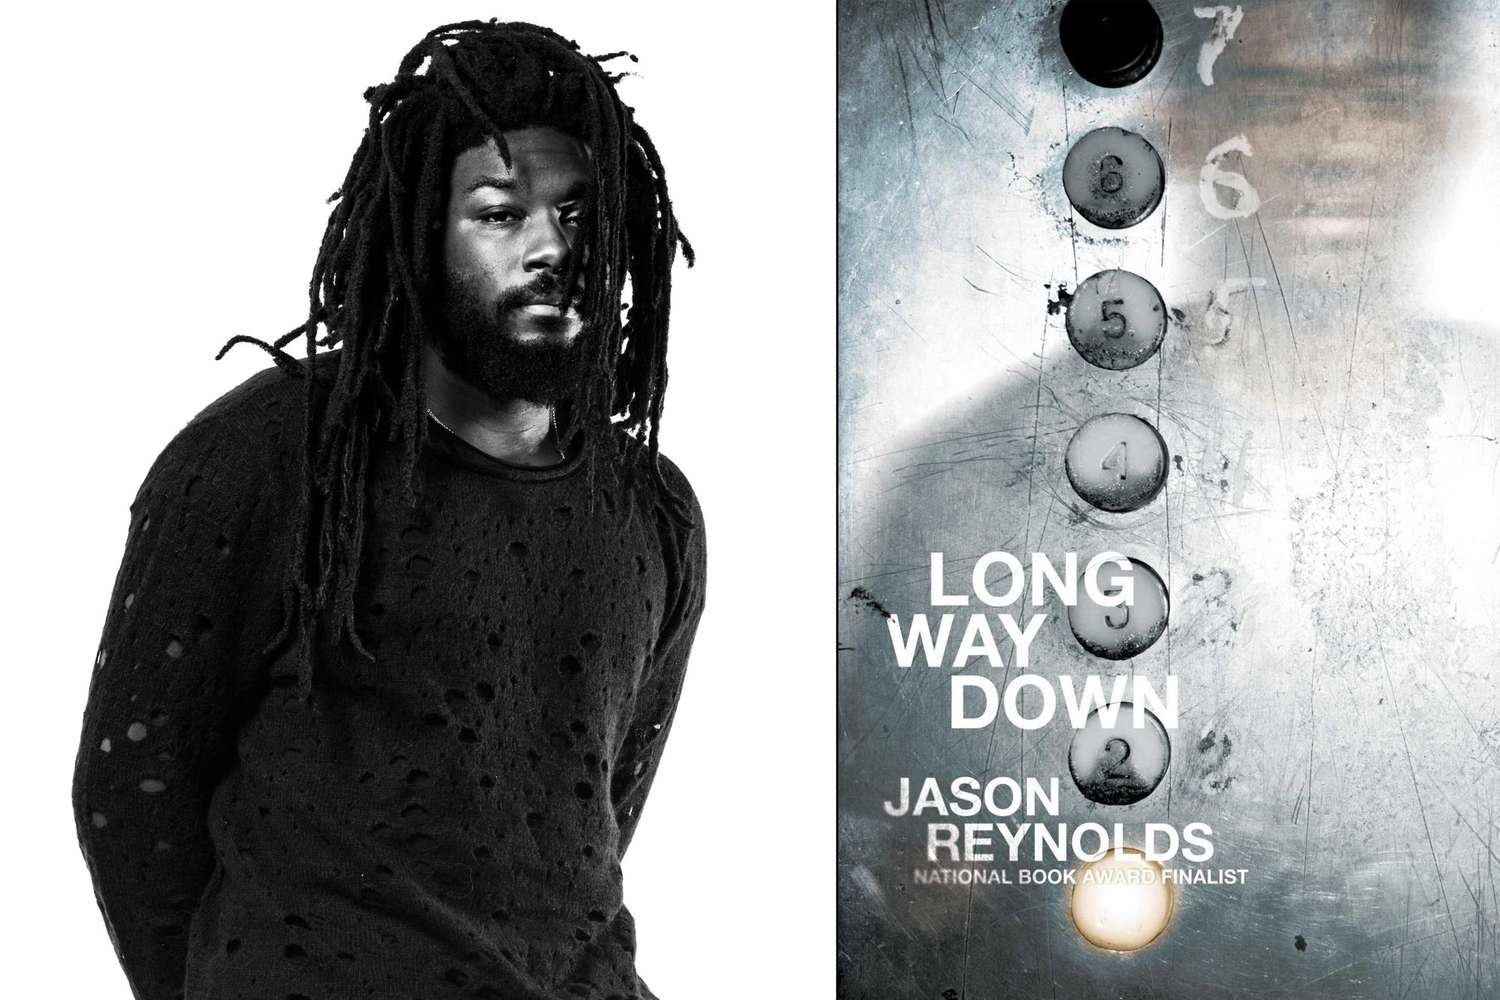 Dive into Raw Emotions and Unforgettable Stories with Jason Reynolds Books